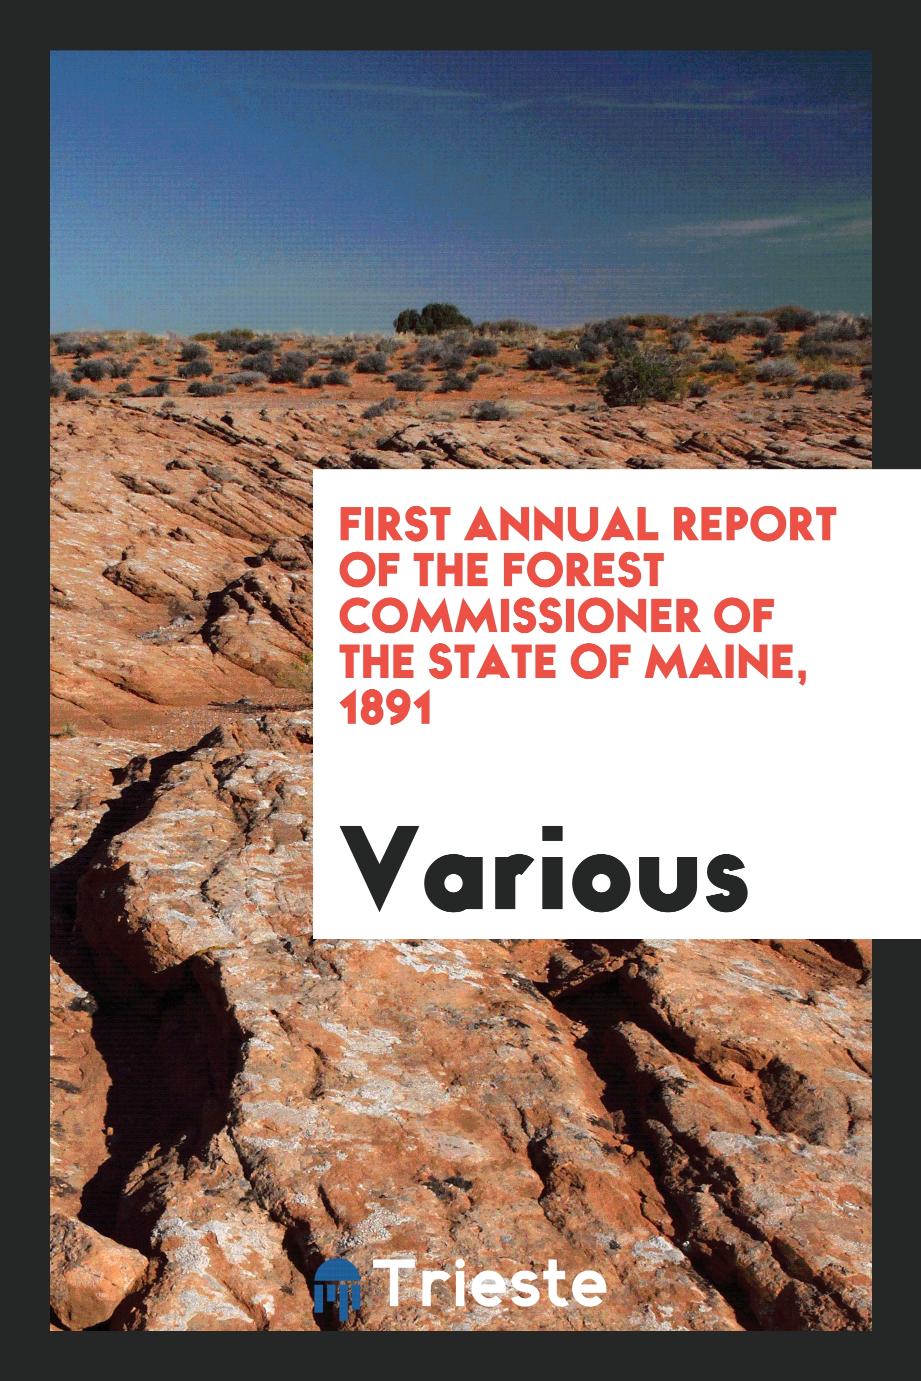 First Annual Report of the Forest Commissioner of the state of Maine, 1891